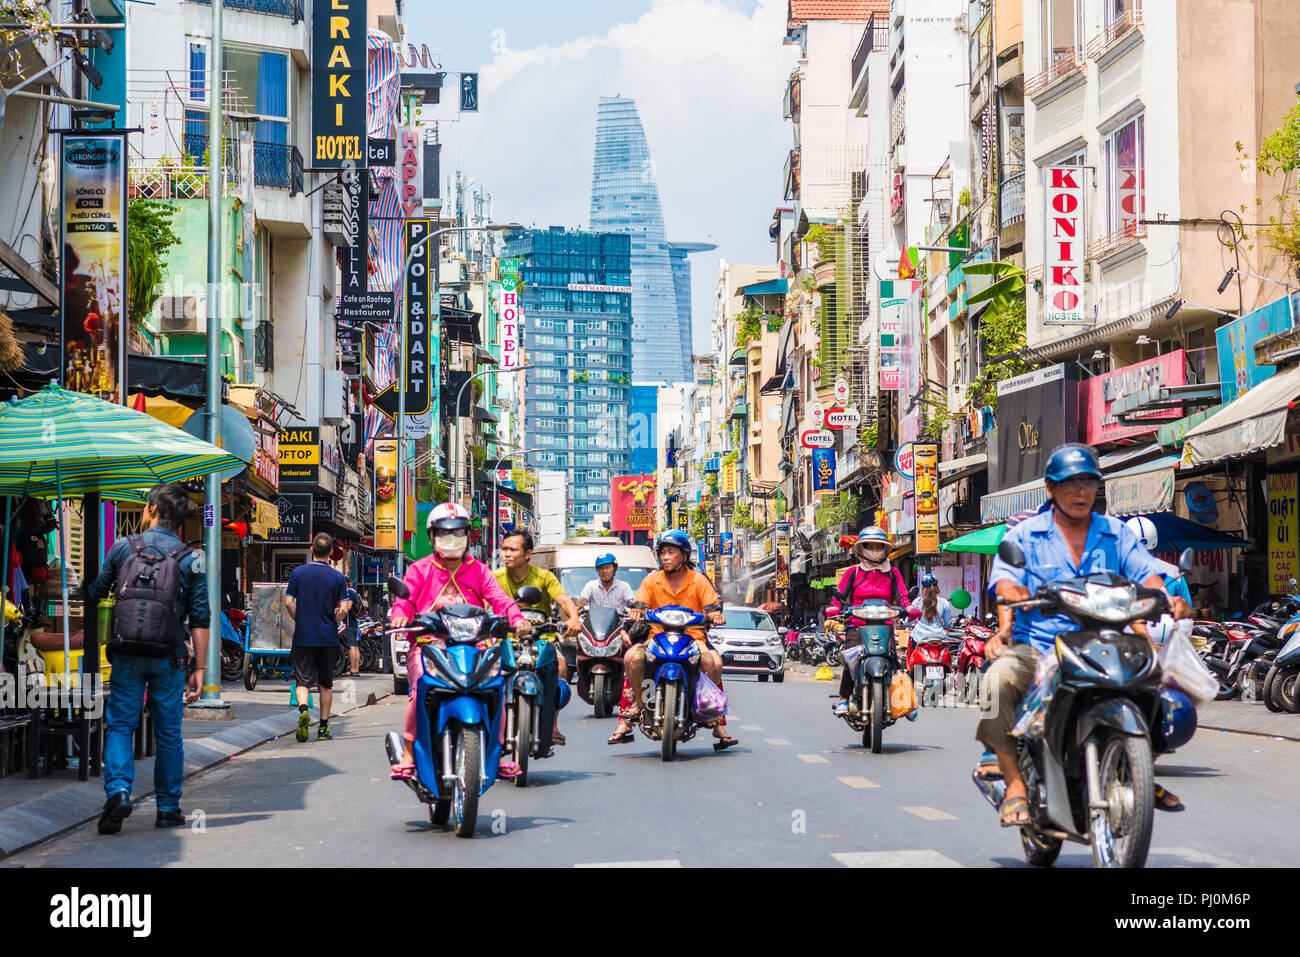 Ho Chi Minh City, Vietnam - Bui Vien Street perspective, numerous signboards, people, motorbikes, Bitexco Tower. Stock Photo